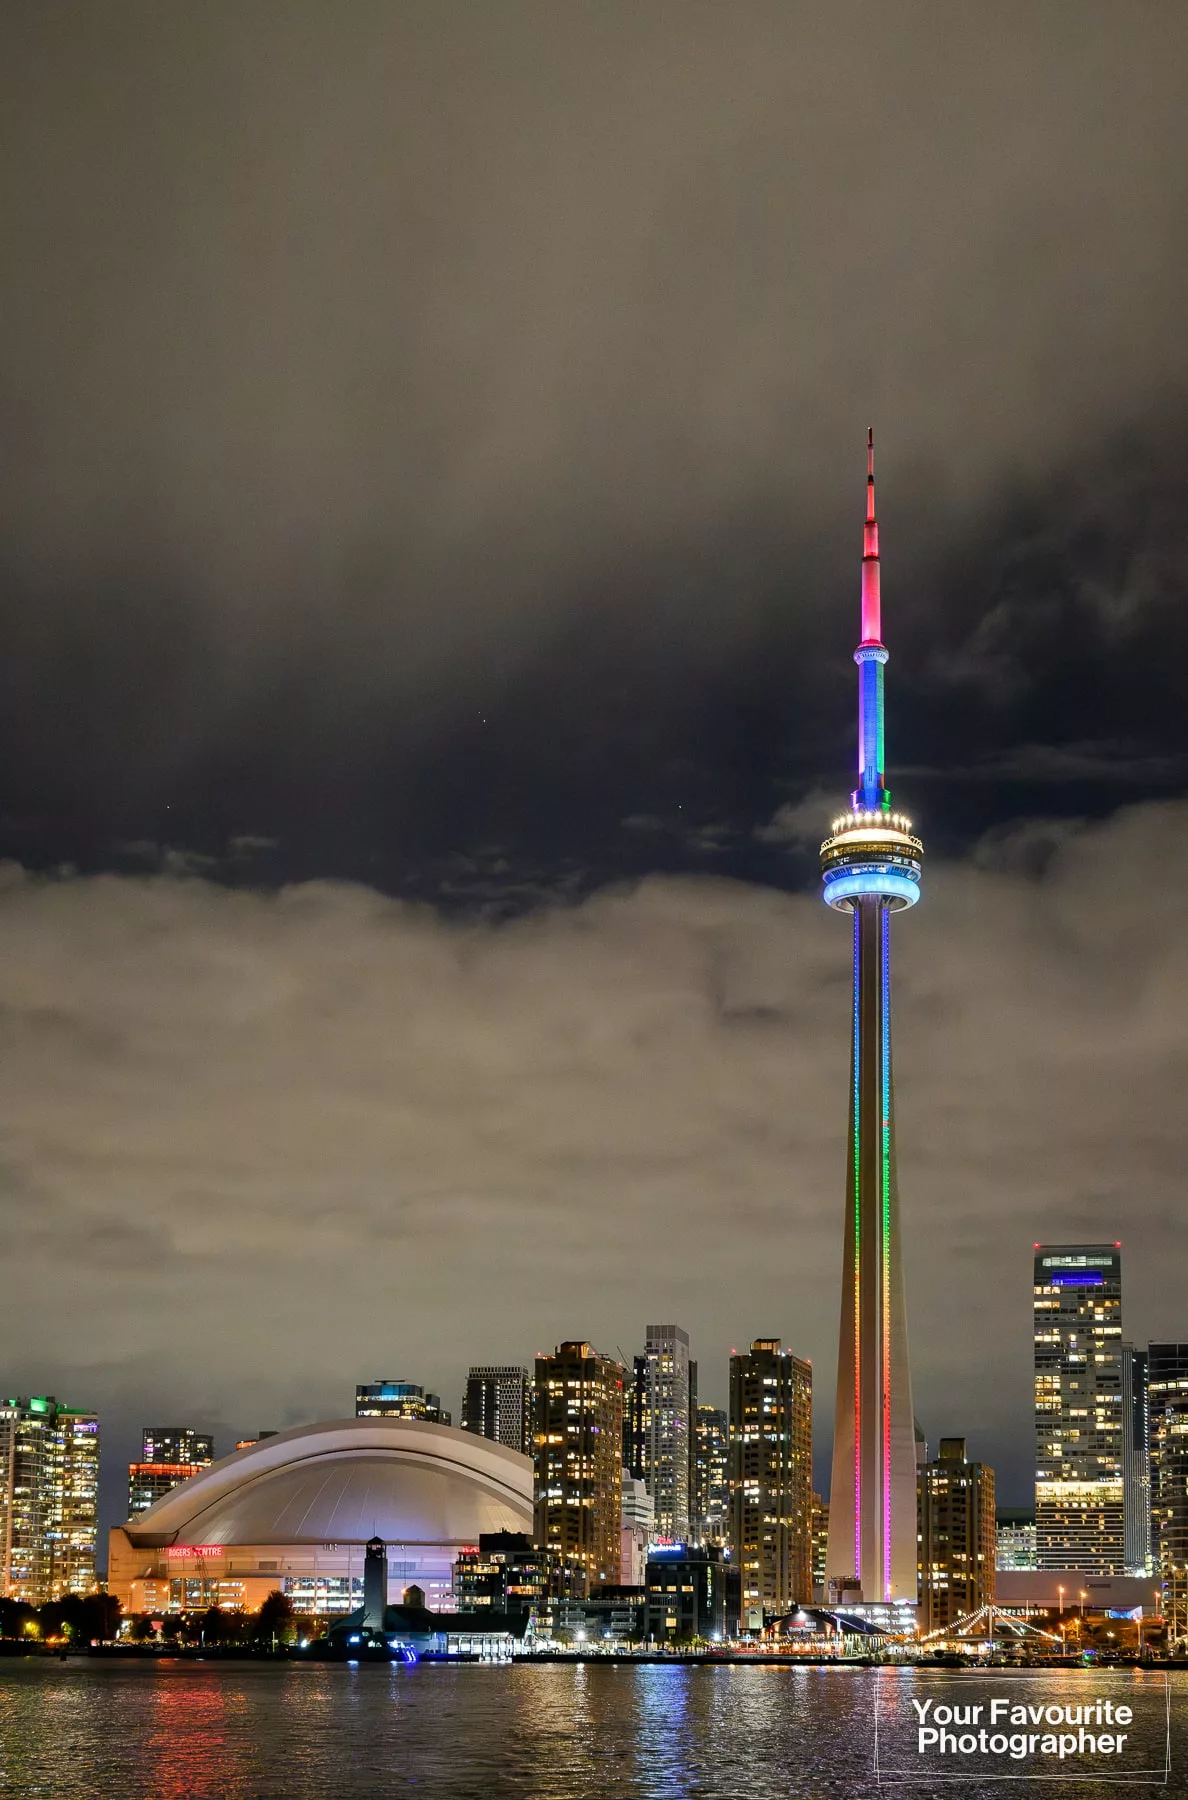 CN Tower lit up in rainbow colours pictured next to the SkyDome (Rogers Centre) on a cloudy night